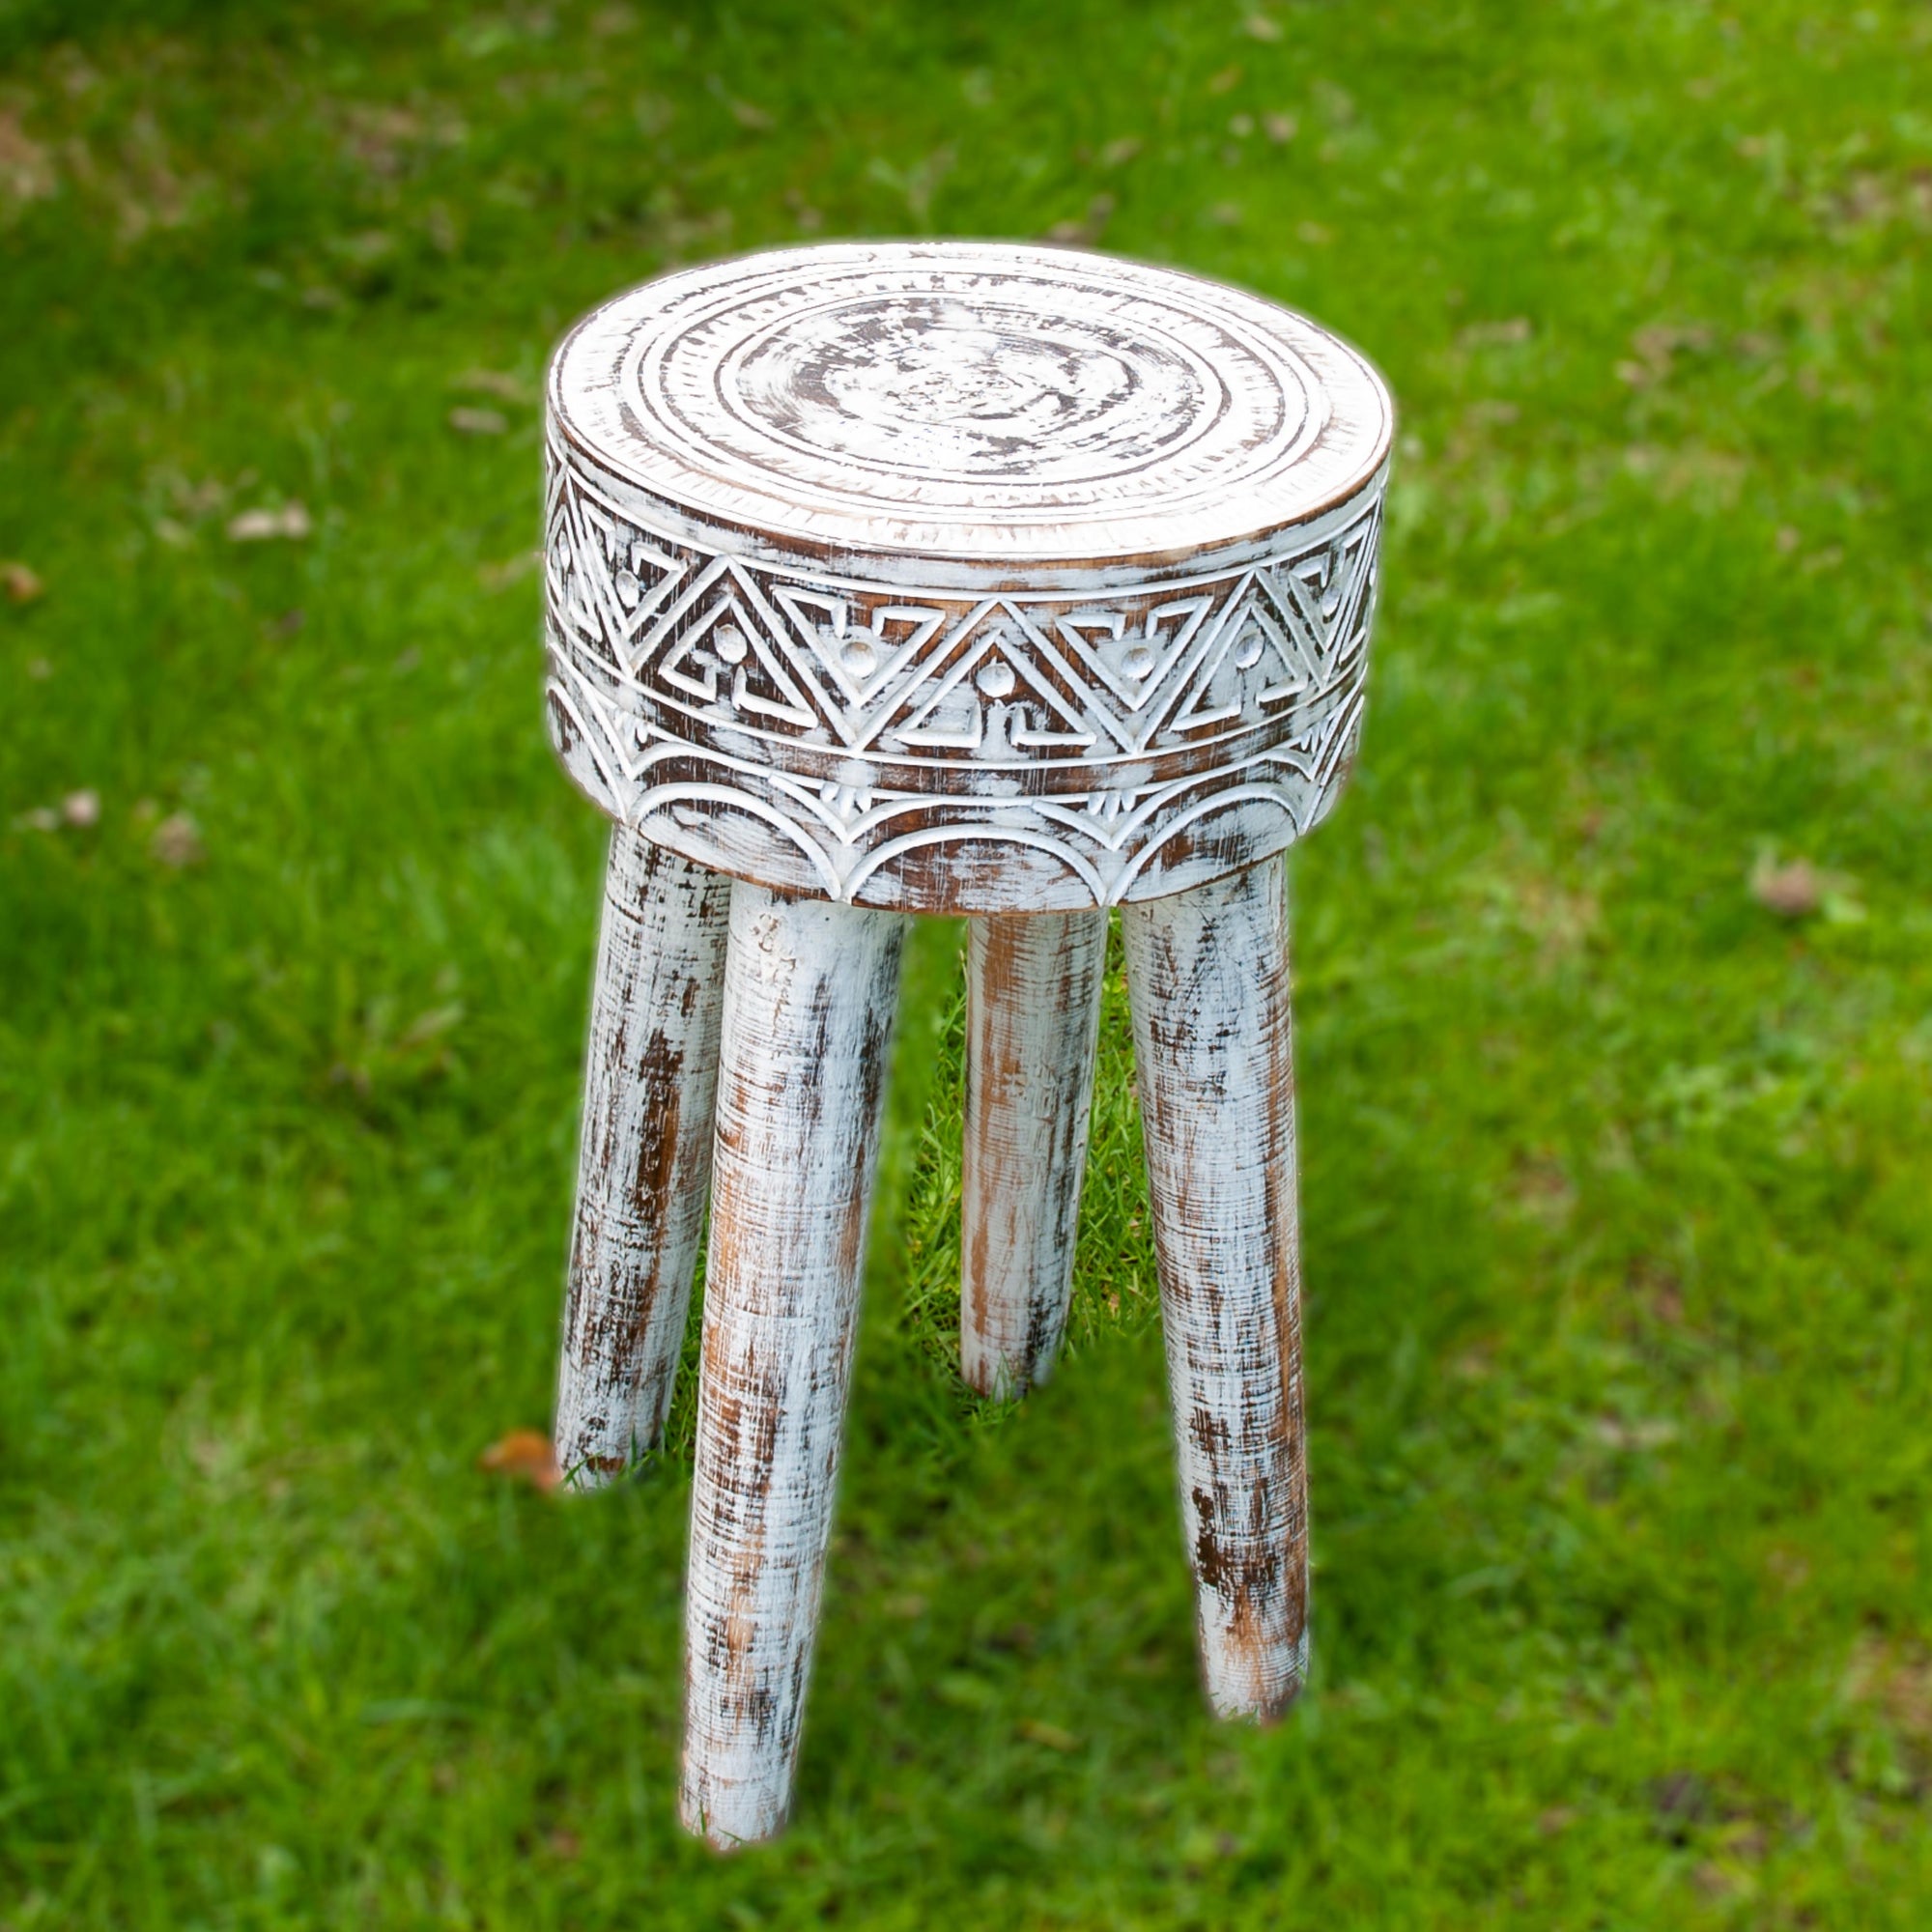 Small white three legged stool with tribal style carvings on grass